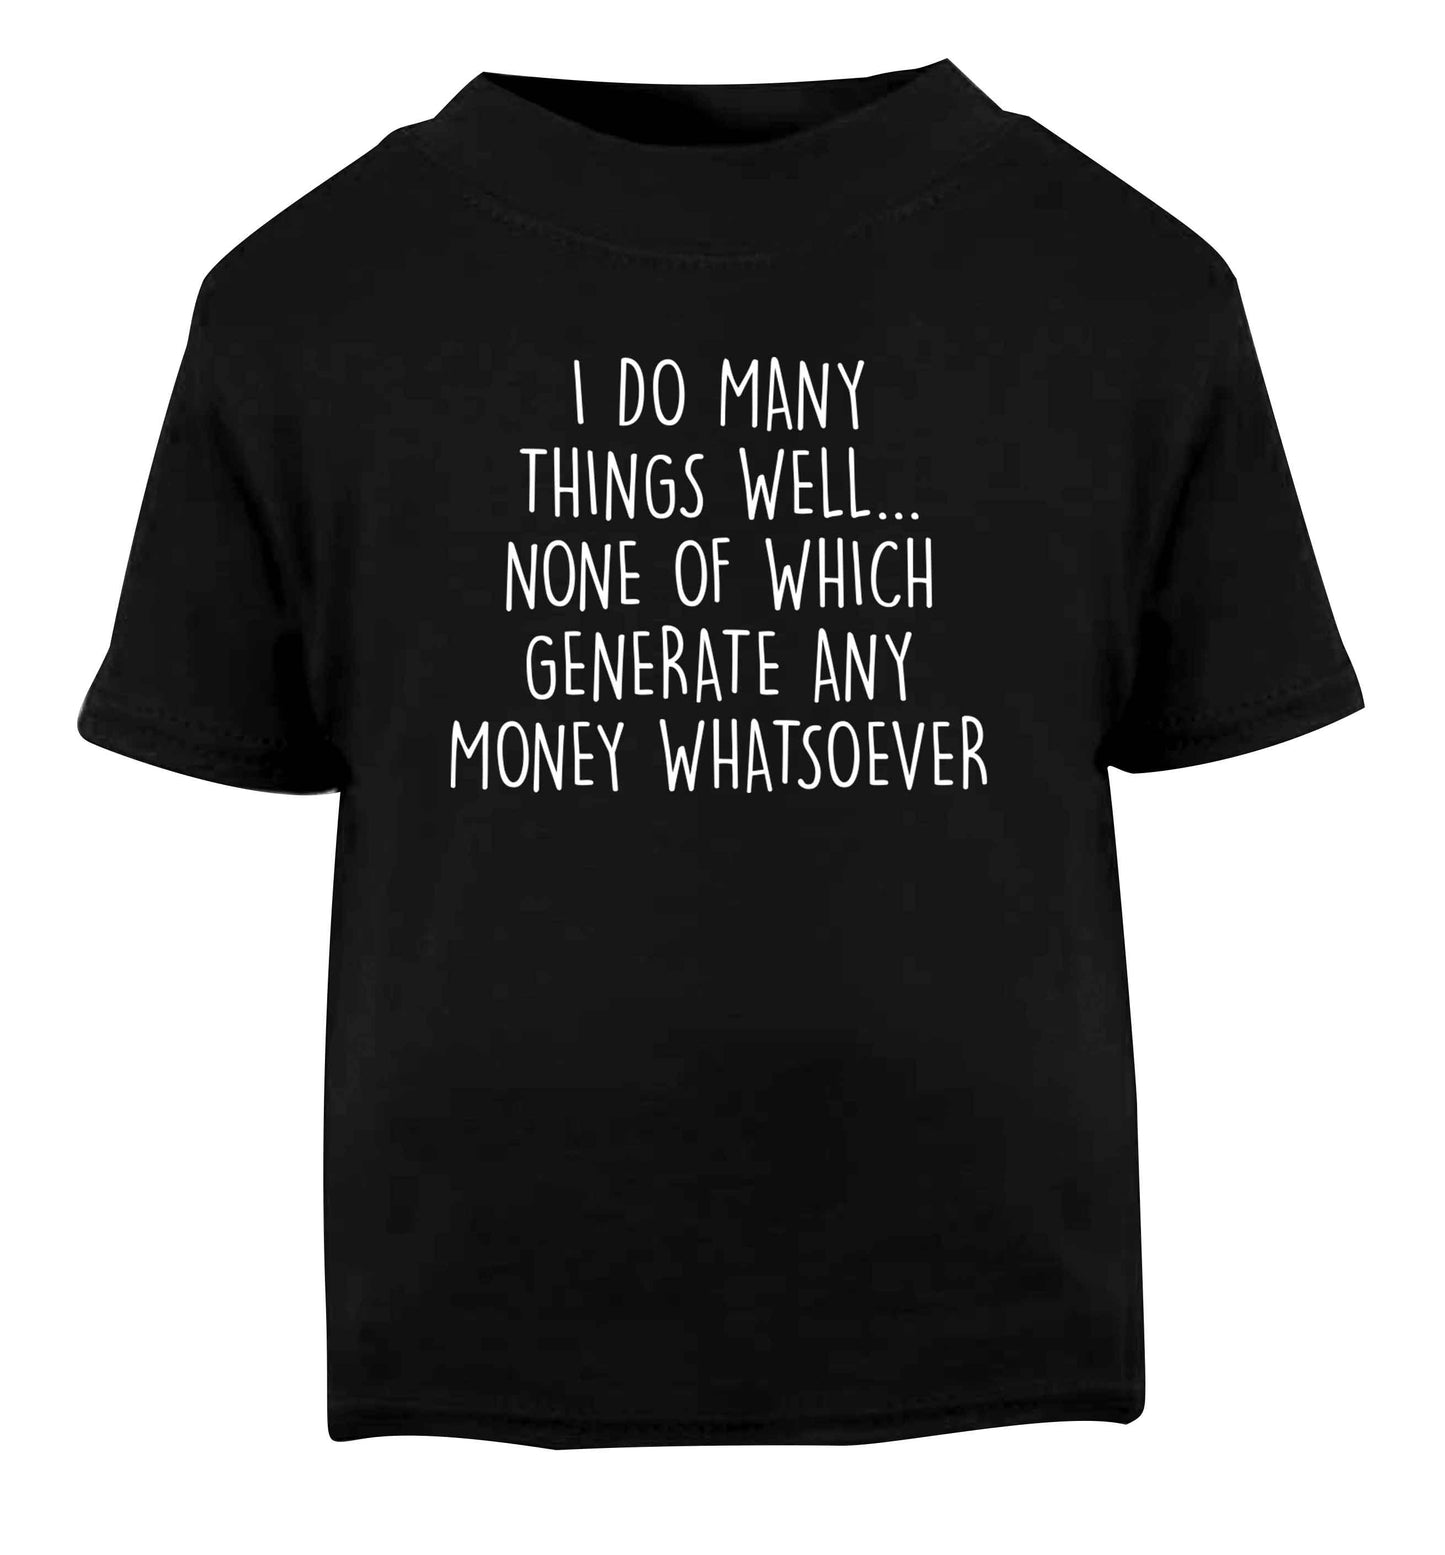 I do many things well none of which generate income Black Baby Toddler Tshirt 2 years